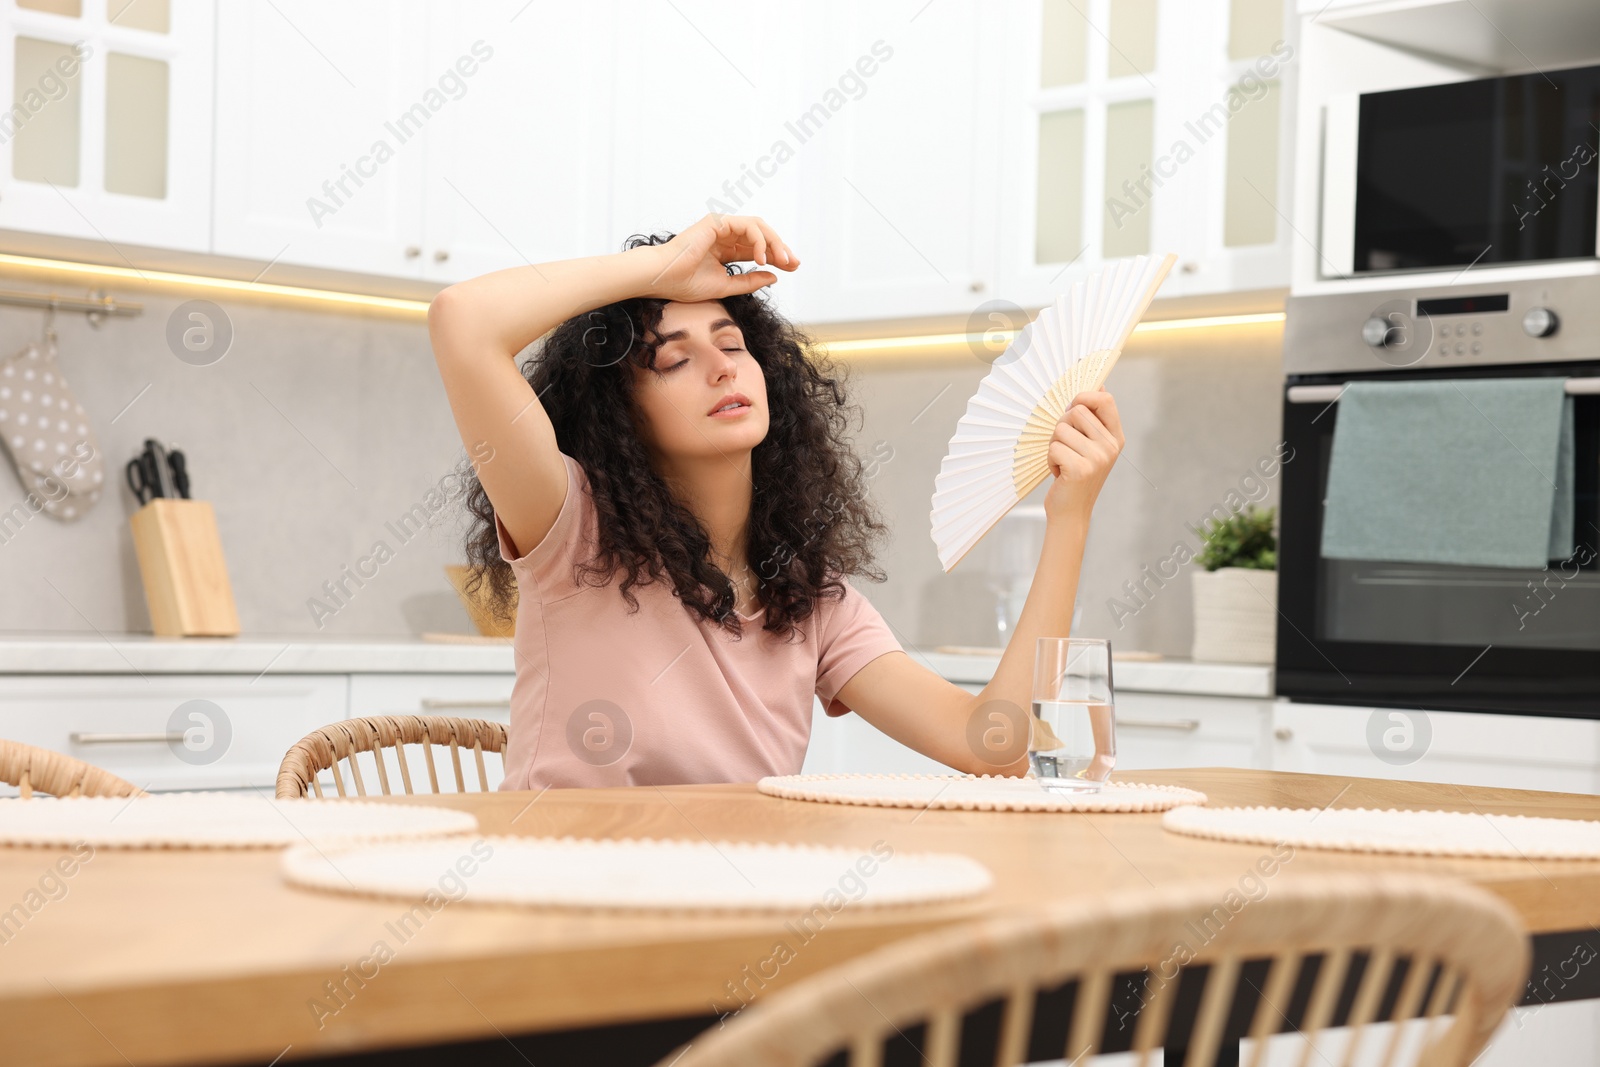 Photo of Young woman waving hand fan to cool herself at table in kitchen